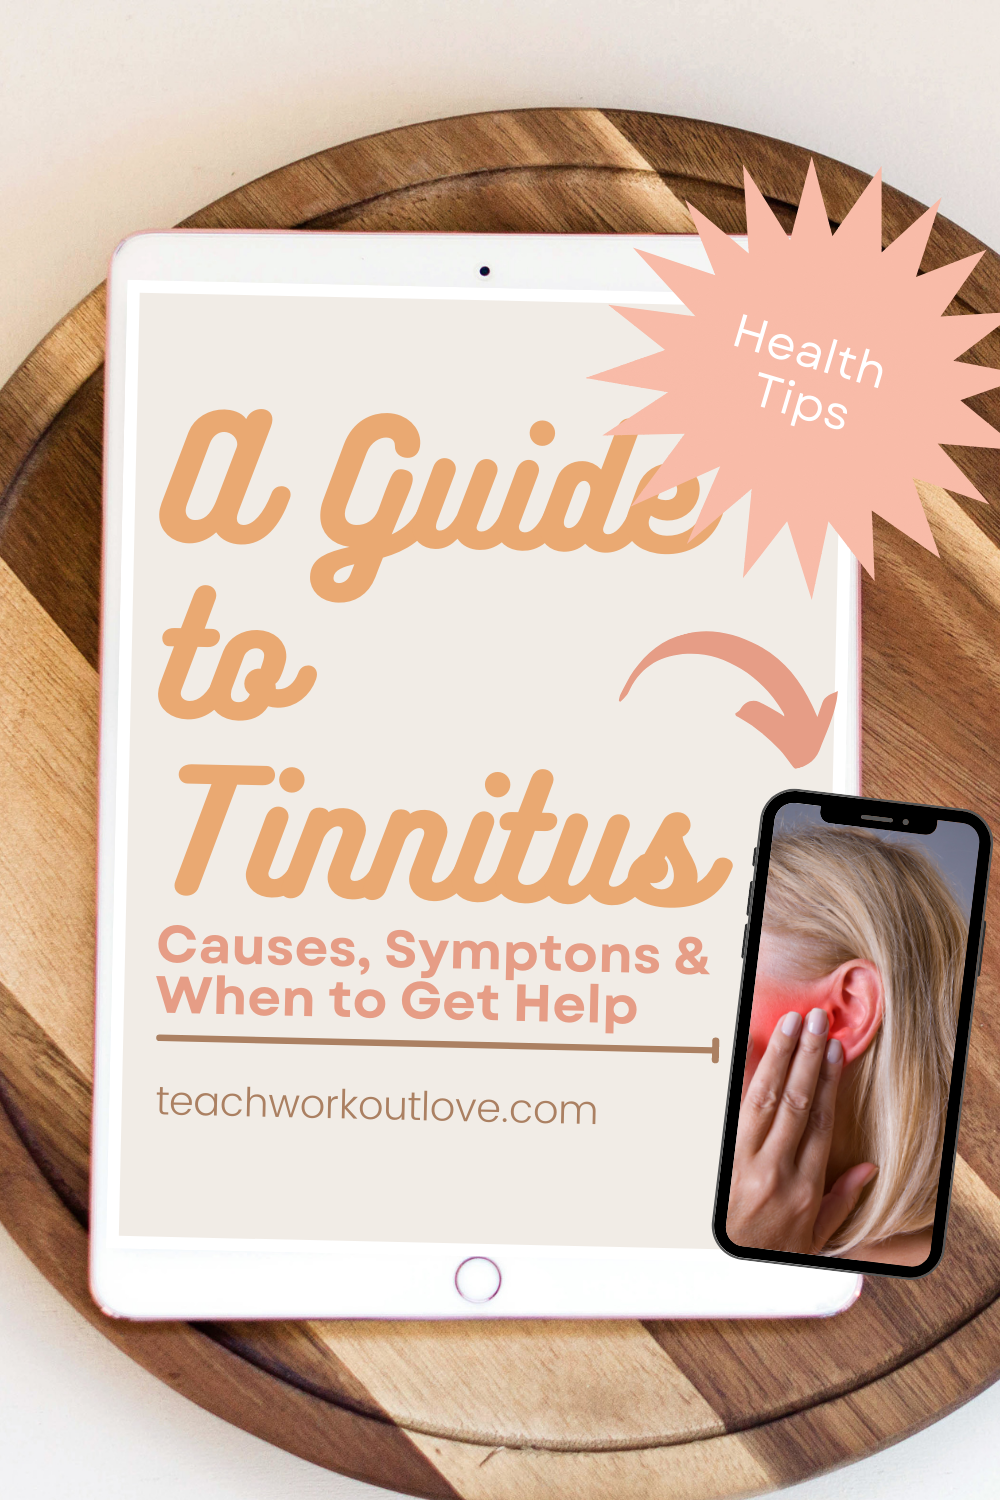 What causes tinnitus, what are the symptoms and risk factors associated with this sensation, and when should someone seek further medical treatment for tinnitus? Below is a quick guide that should answer these questions.